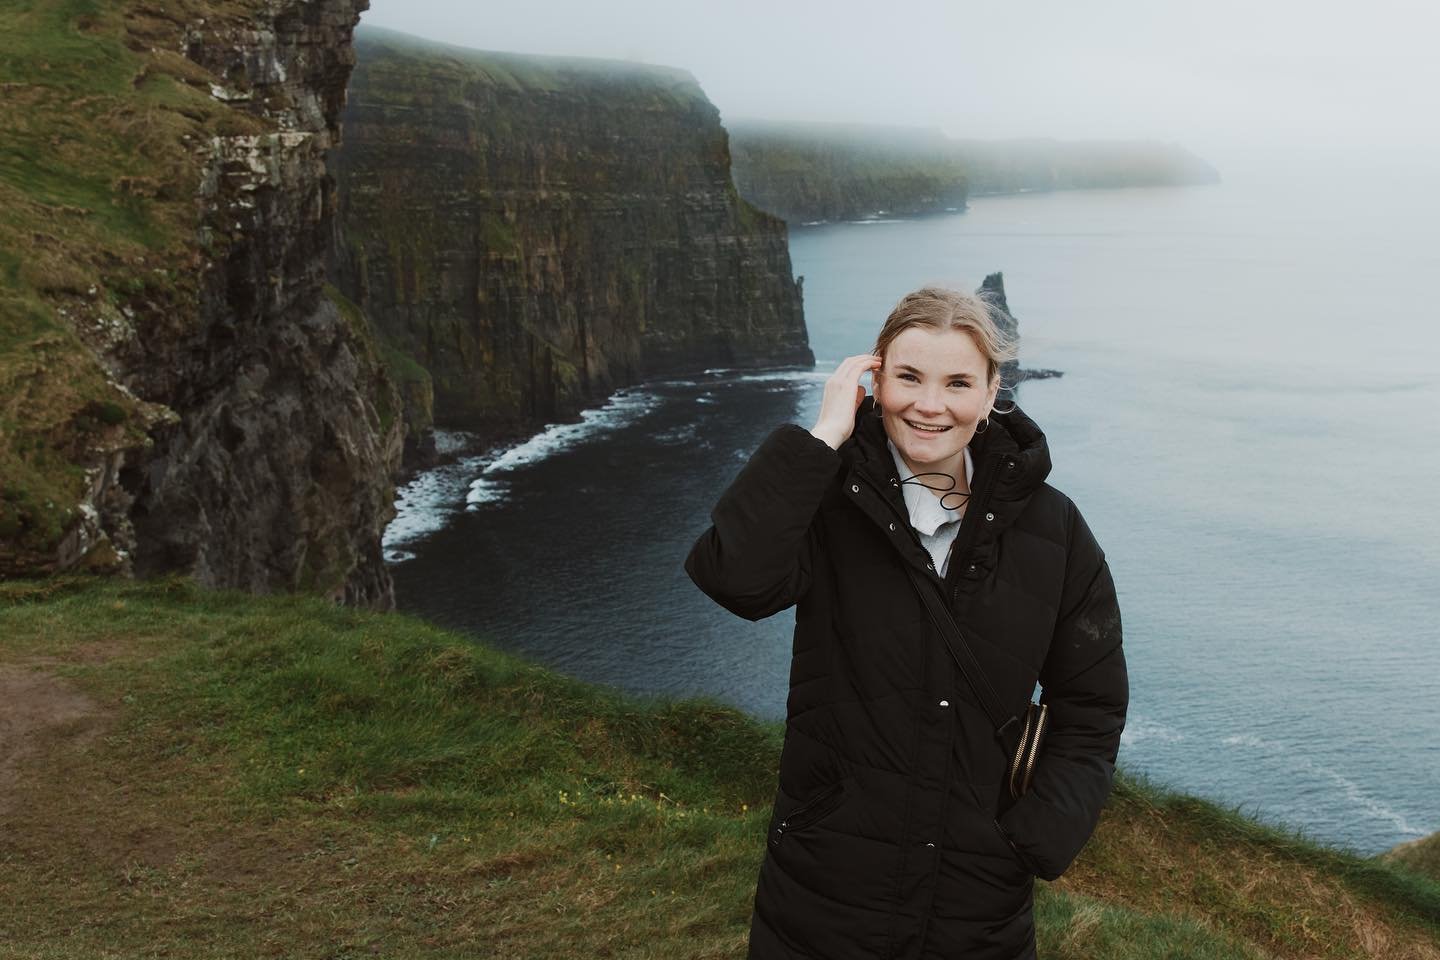 Hi friends!!!! I am back in office and feel so creatively fulfilled and refreshed after my time in Ireland! It was an absolute dream and I cannot be more grateful for my time there. Shooting in a new country was so creatively enriching, I loved every